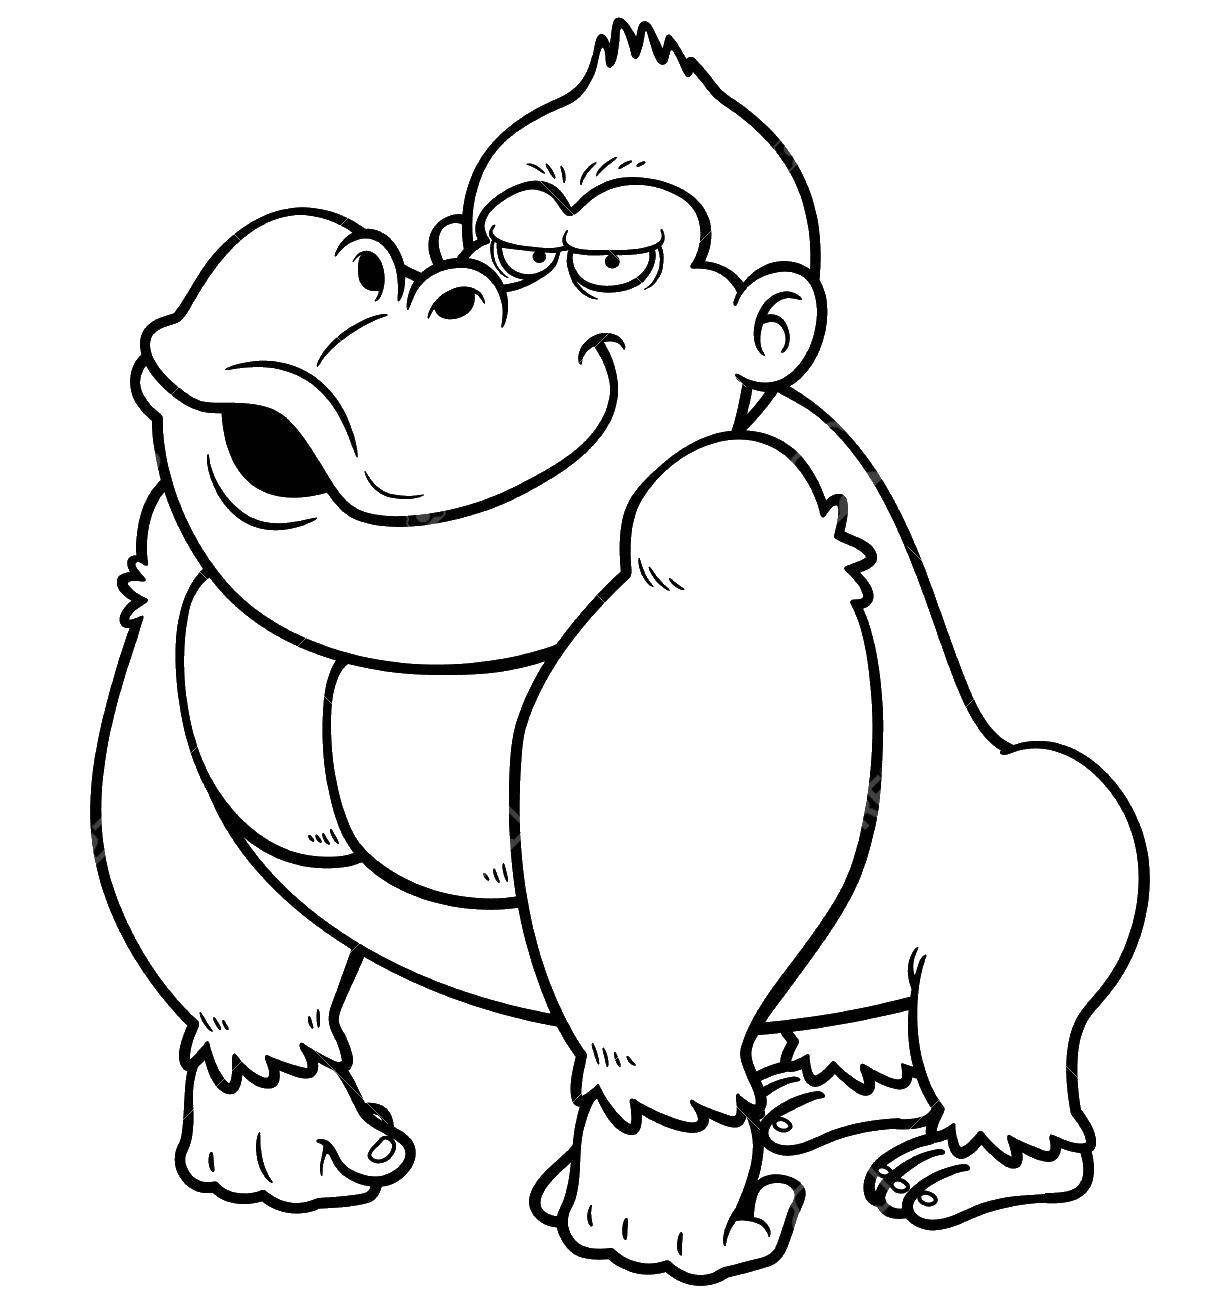 Coloring Gorilla. Category Animals. Tags:  Animals, monkey.